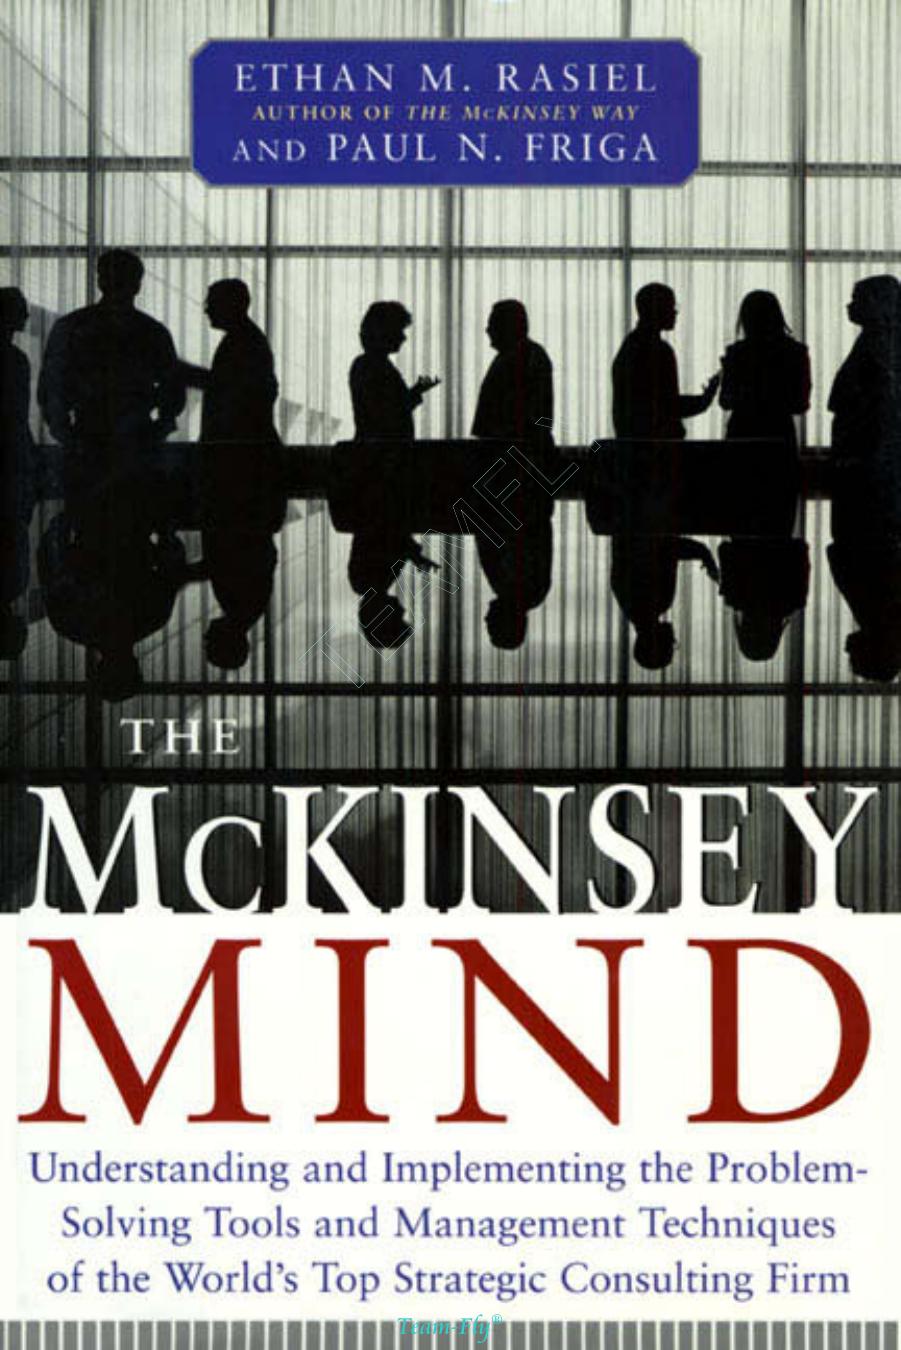 The McKinsey Mind Understanding and Implementing the Problem-Solving Tools and Management Techniques of